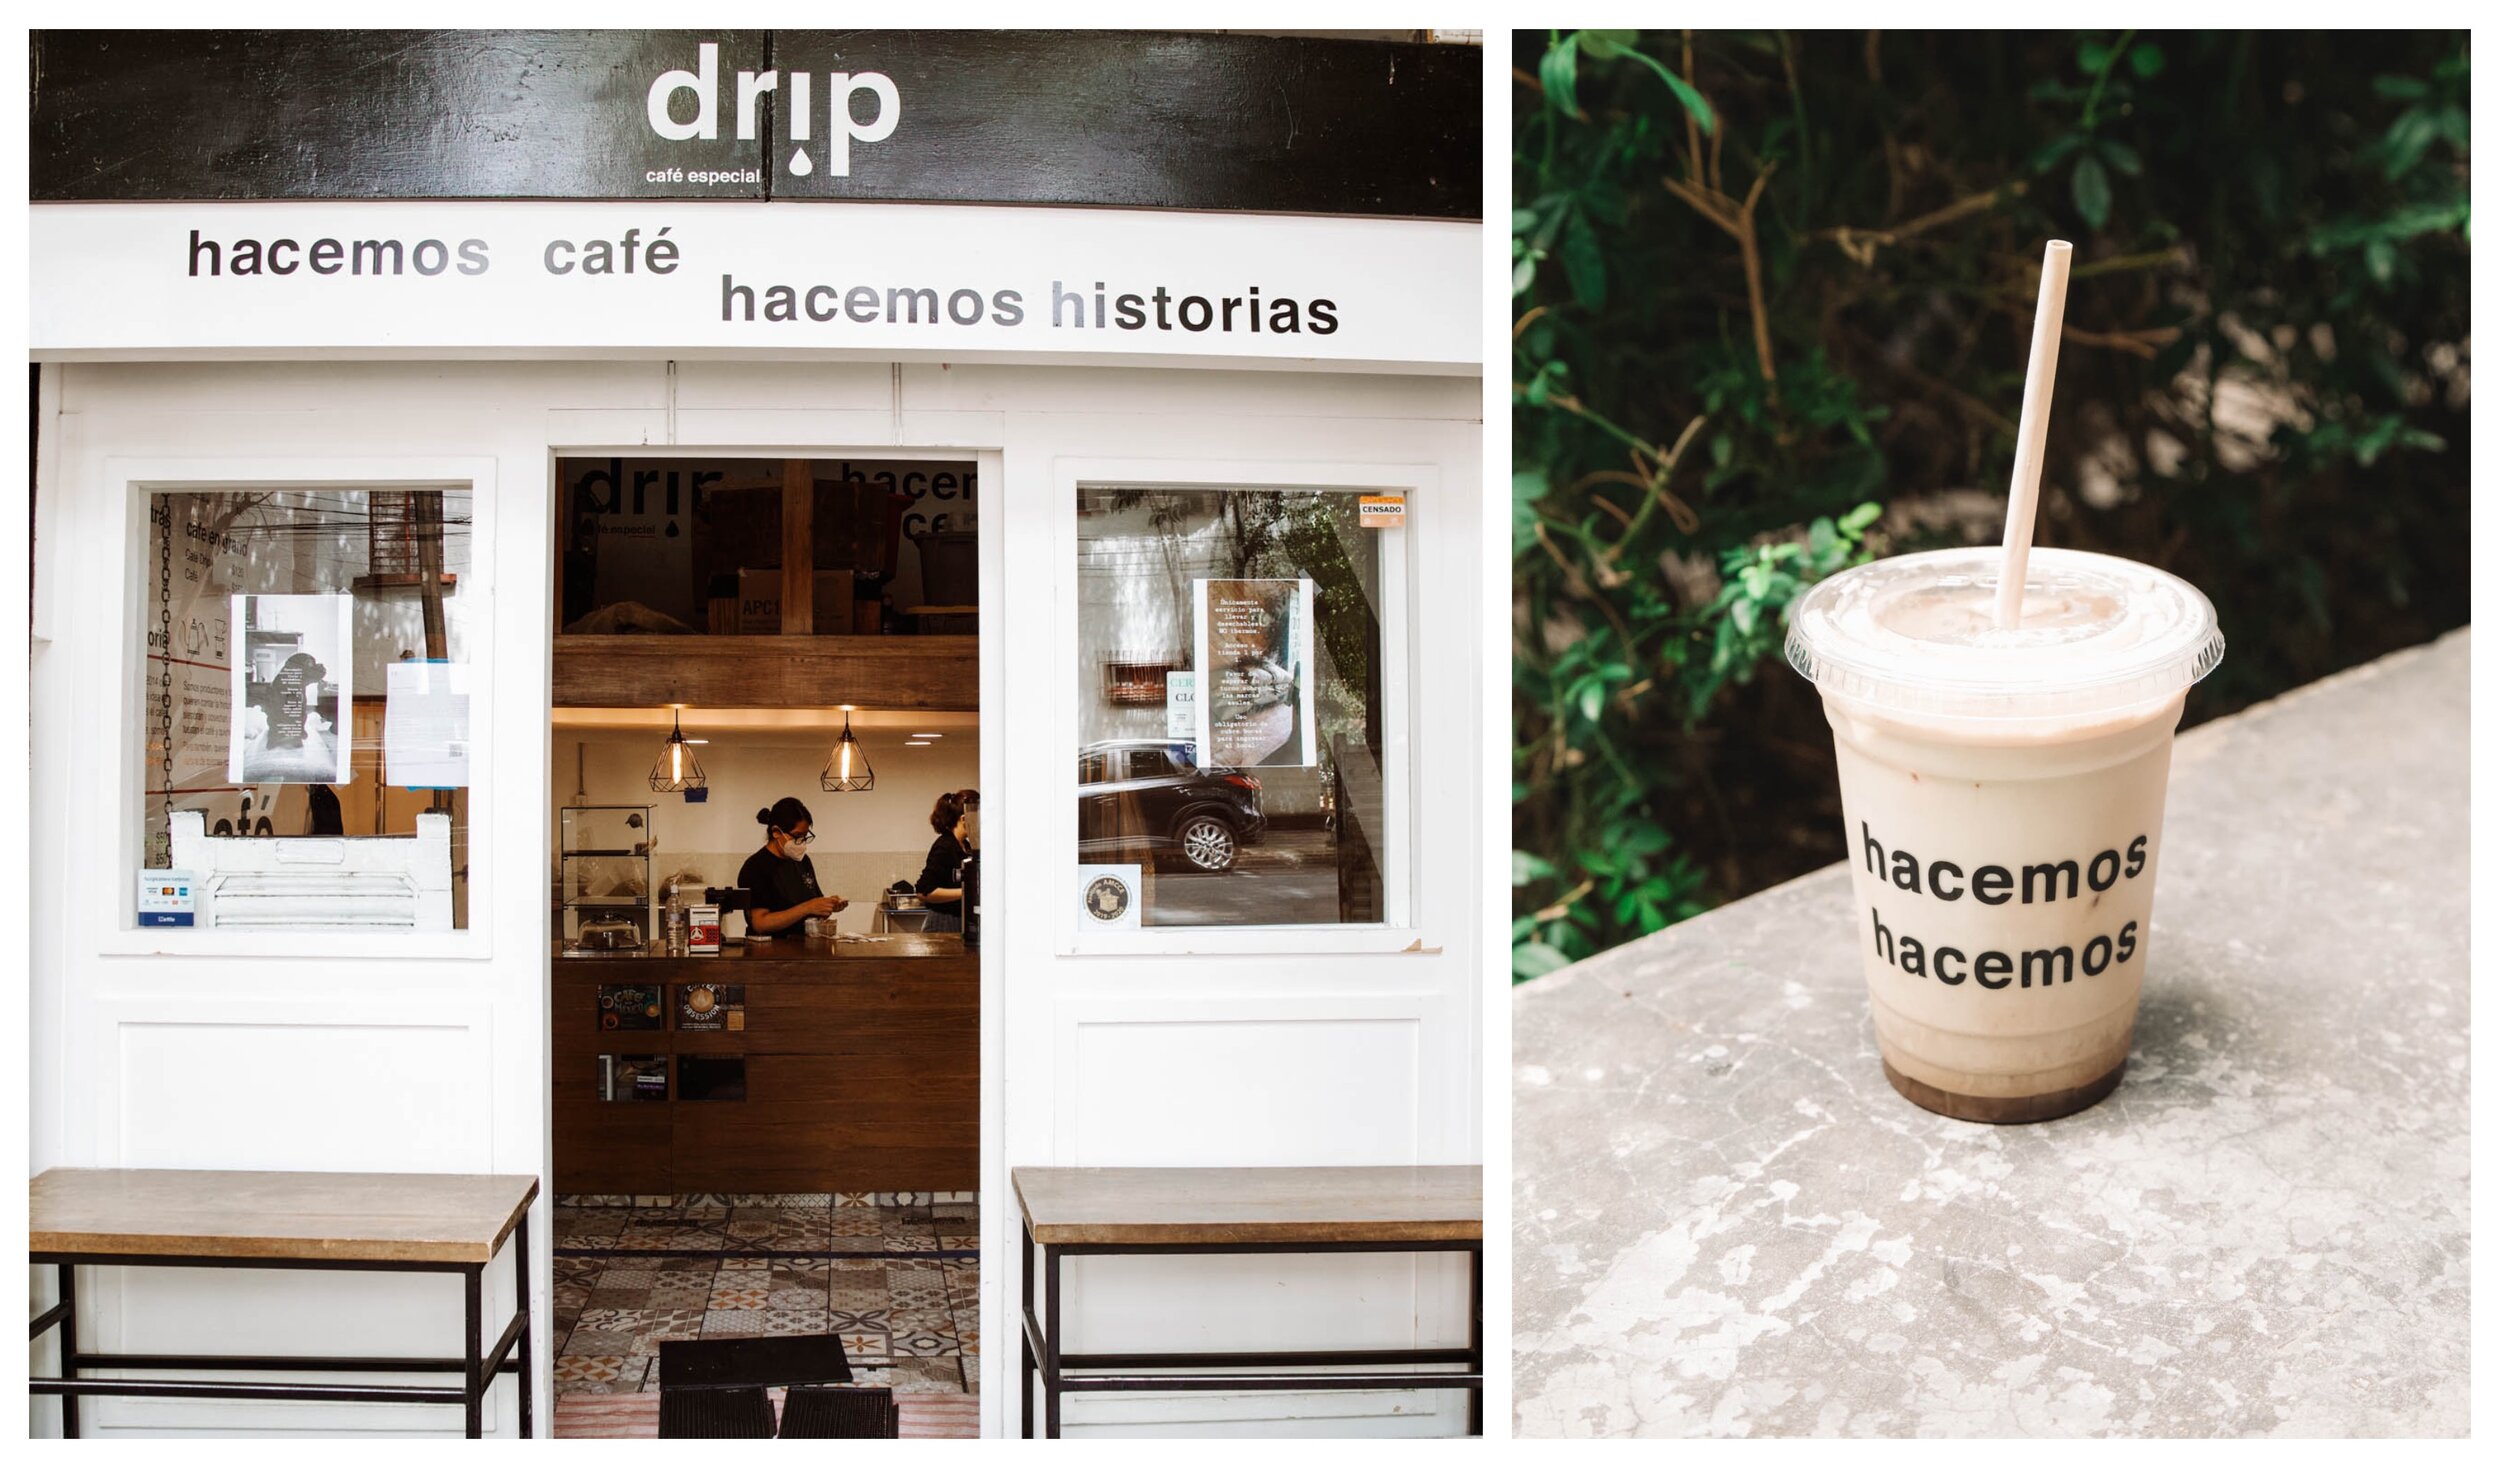 Dirty chai latte from Drip specialty coffee in La Roma, Mexico City